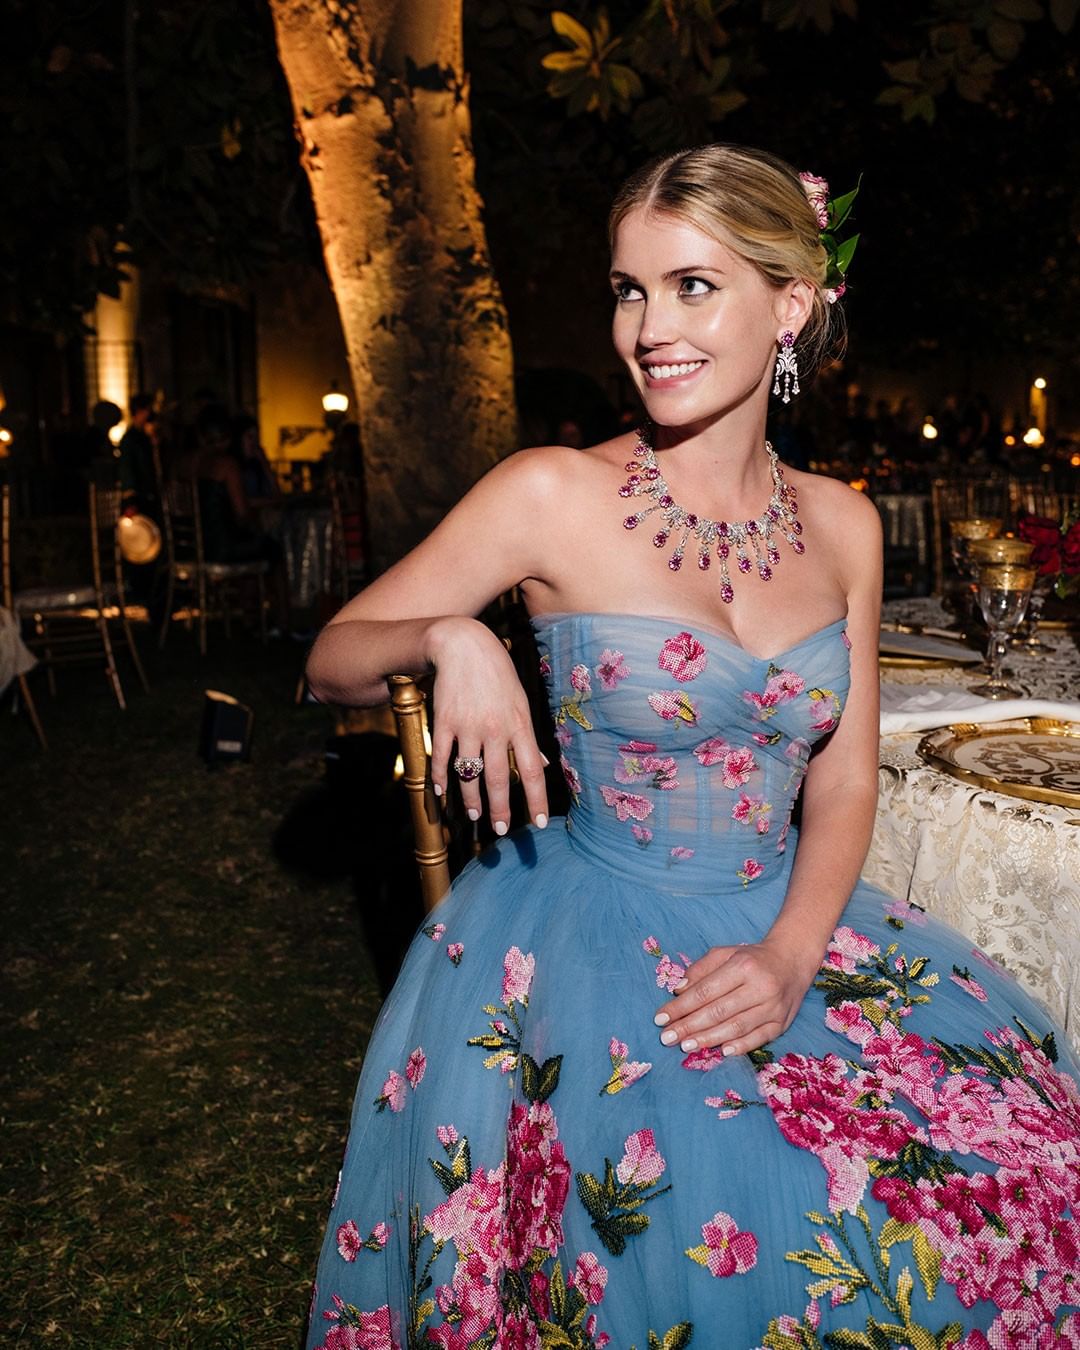 Princess Diana's Niece Just Got Married in a Victorian-Inspired Wedding Dress